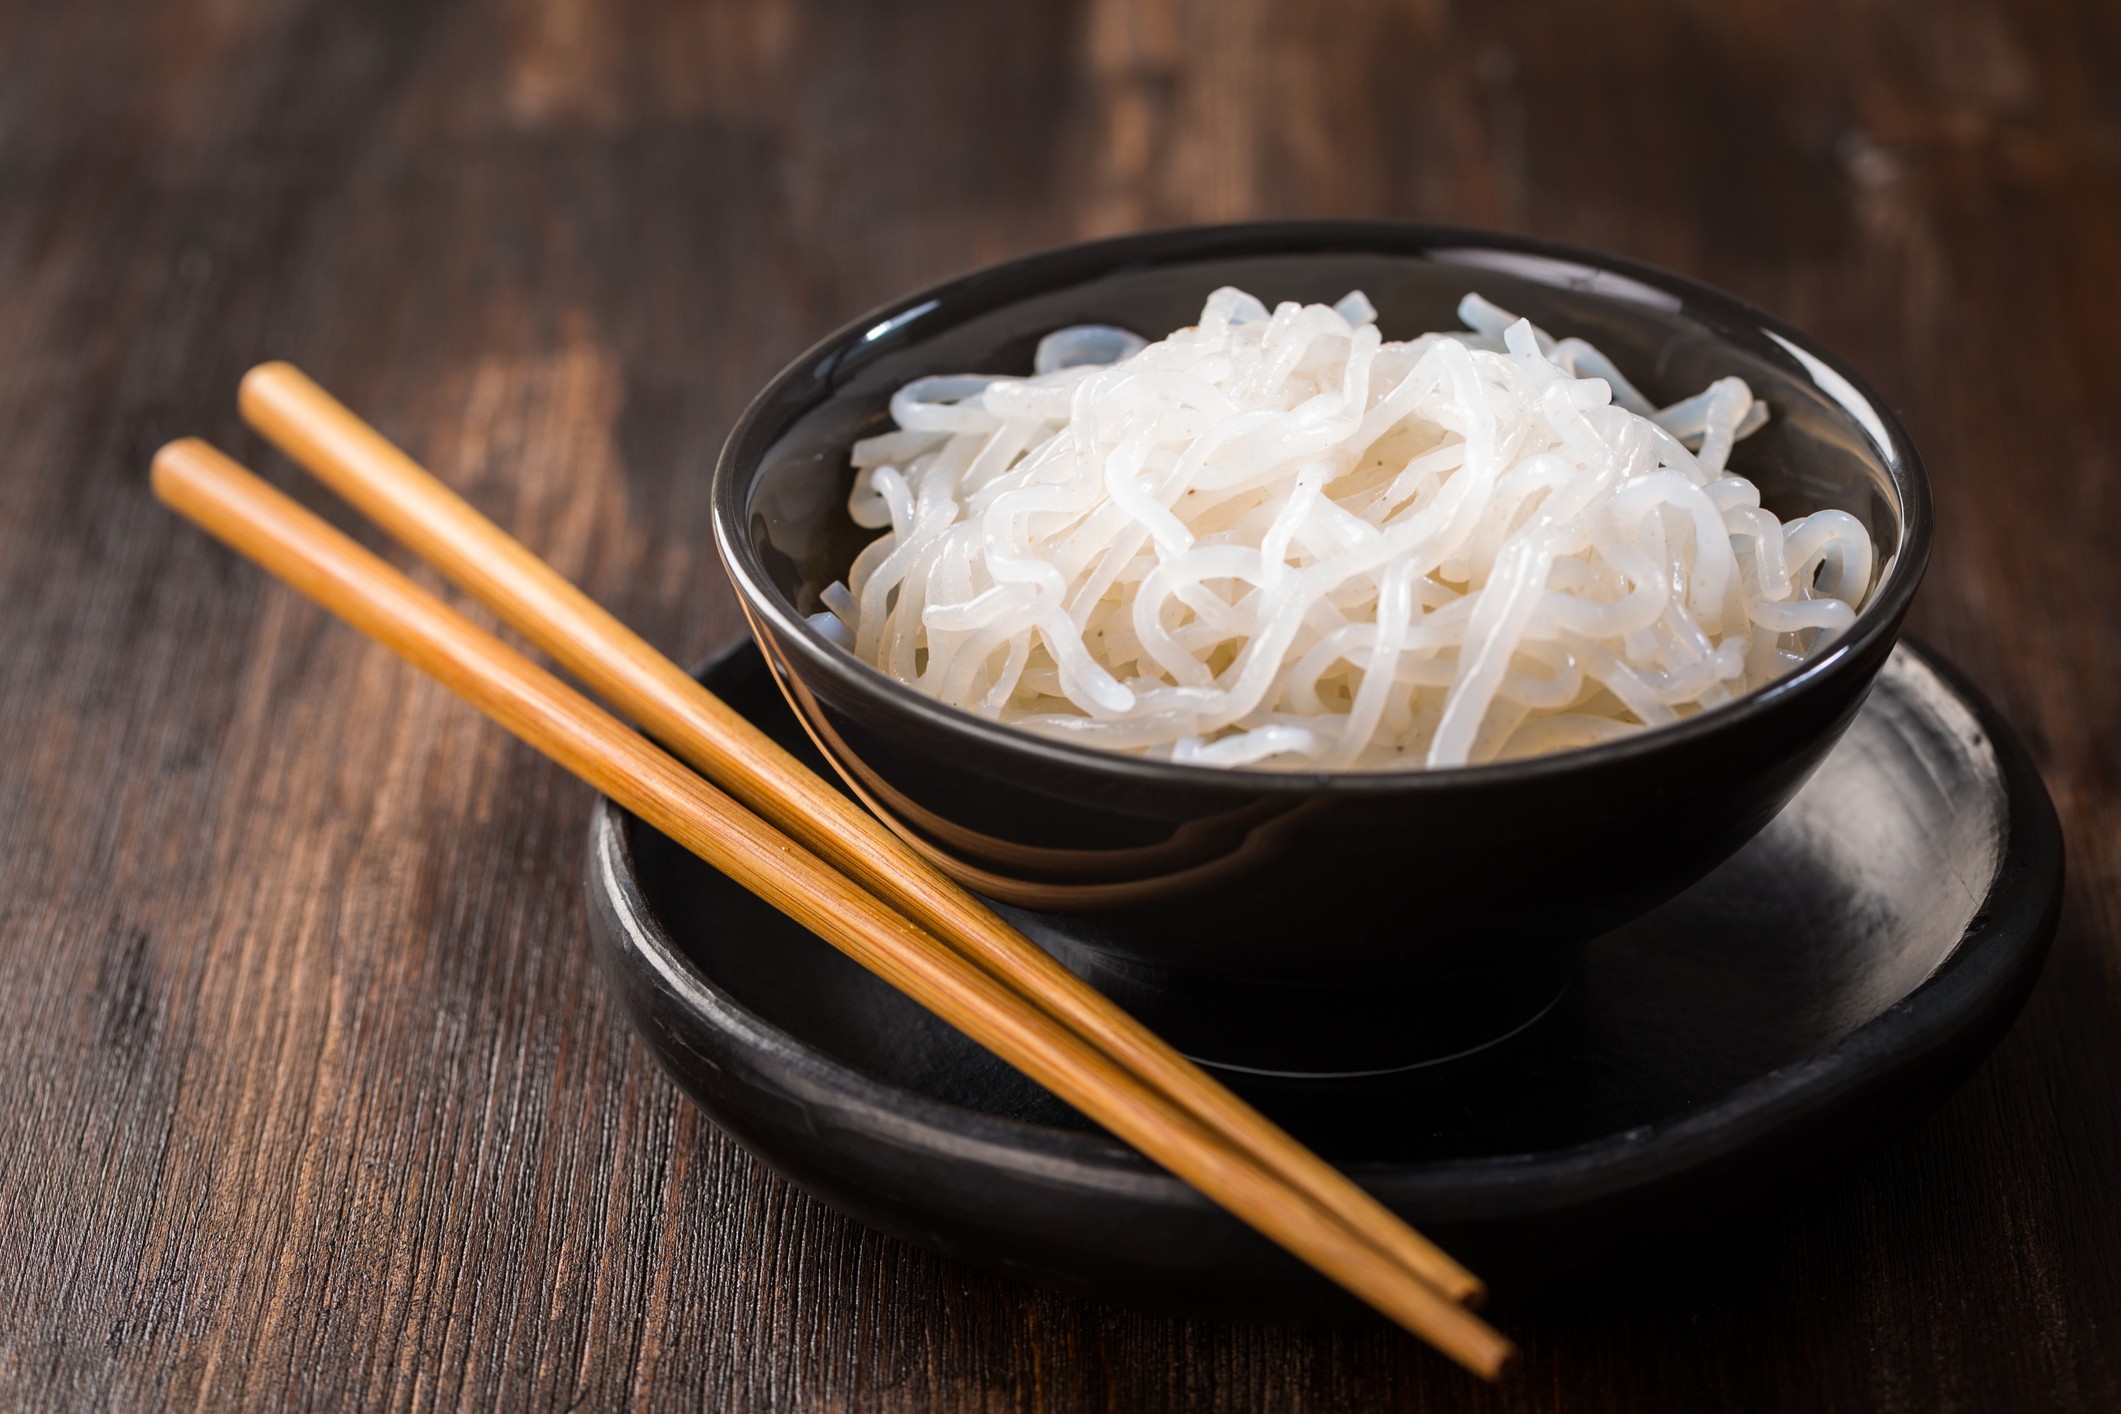 Woman Files Lawsuits After 'Diet' Noodles Put Her in the Hospital